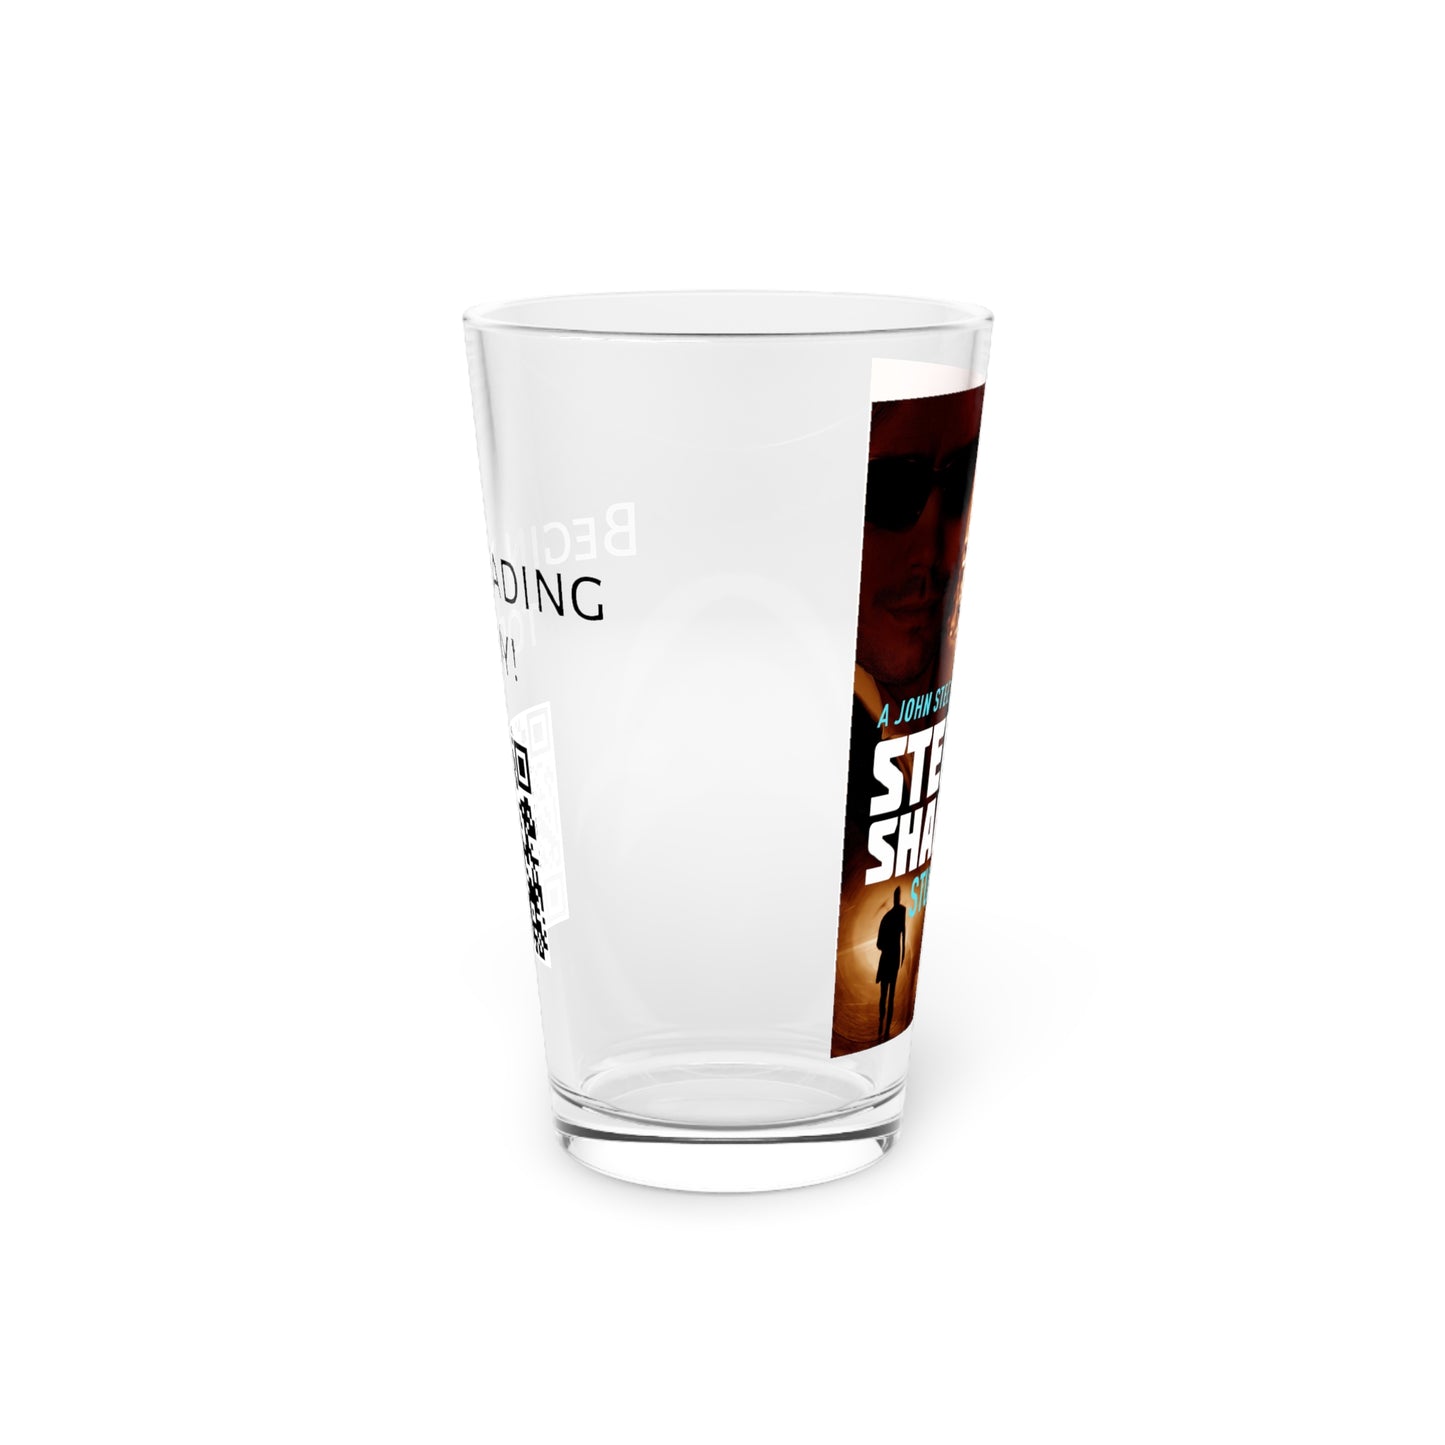 Steel And Shadows - Pint Glass